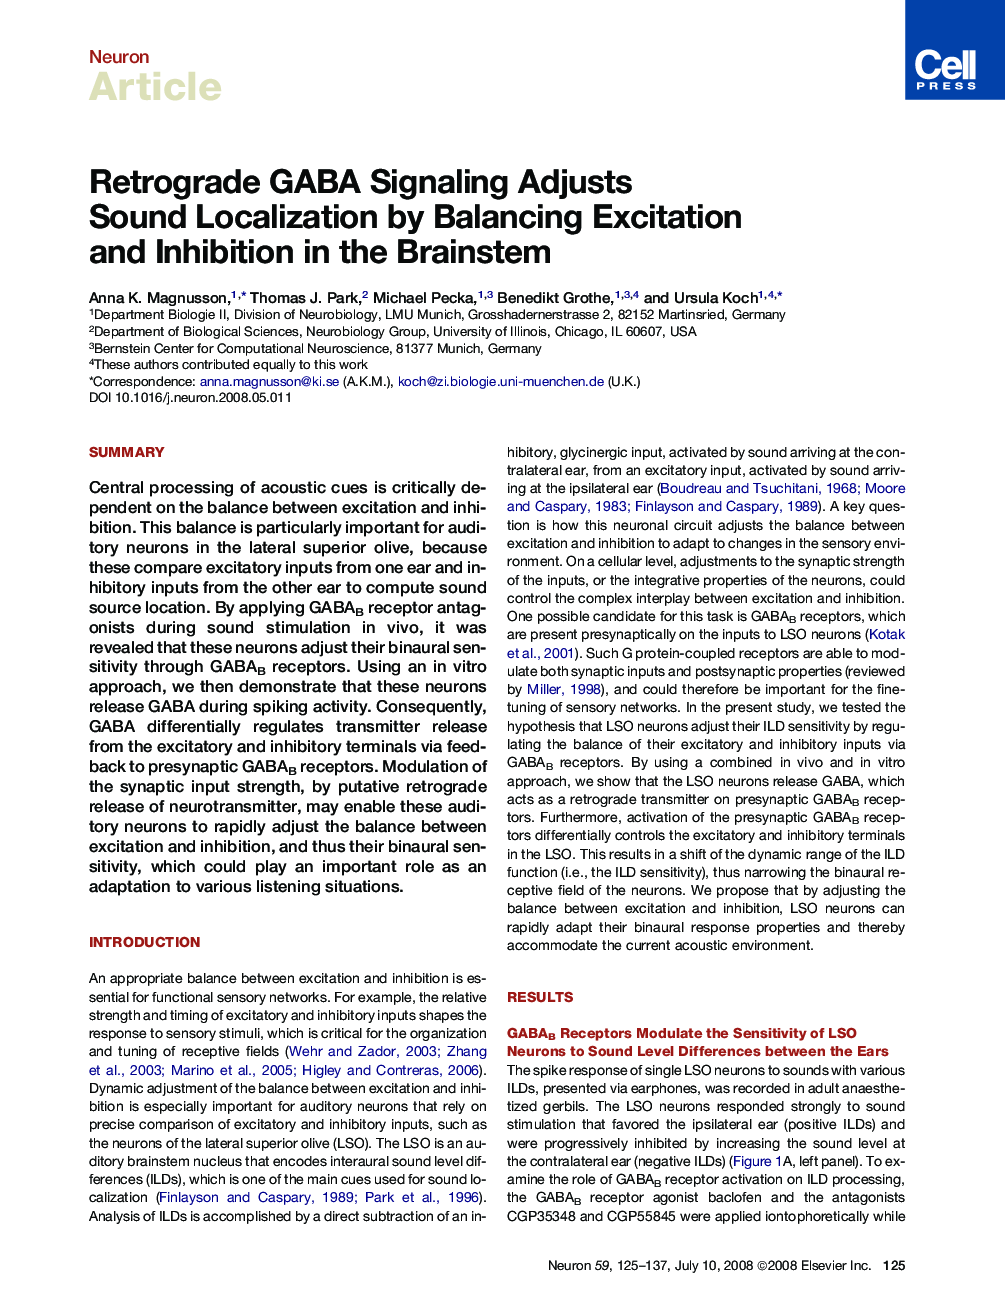 Retrograde GABA Signaling Adjusts Sound Localization by Balancing Excitation and Inhibition in the Brainstem